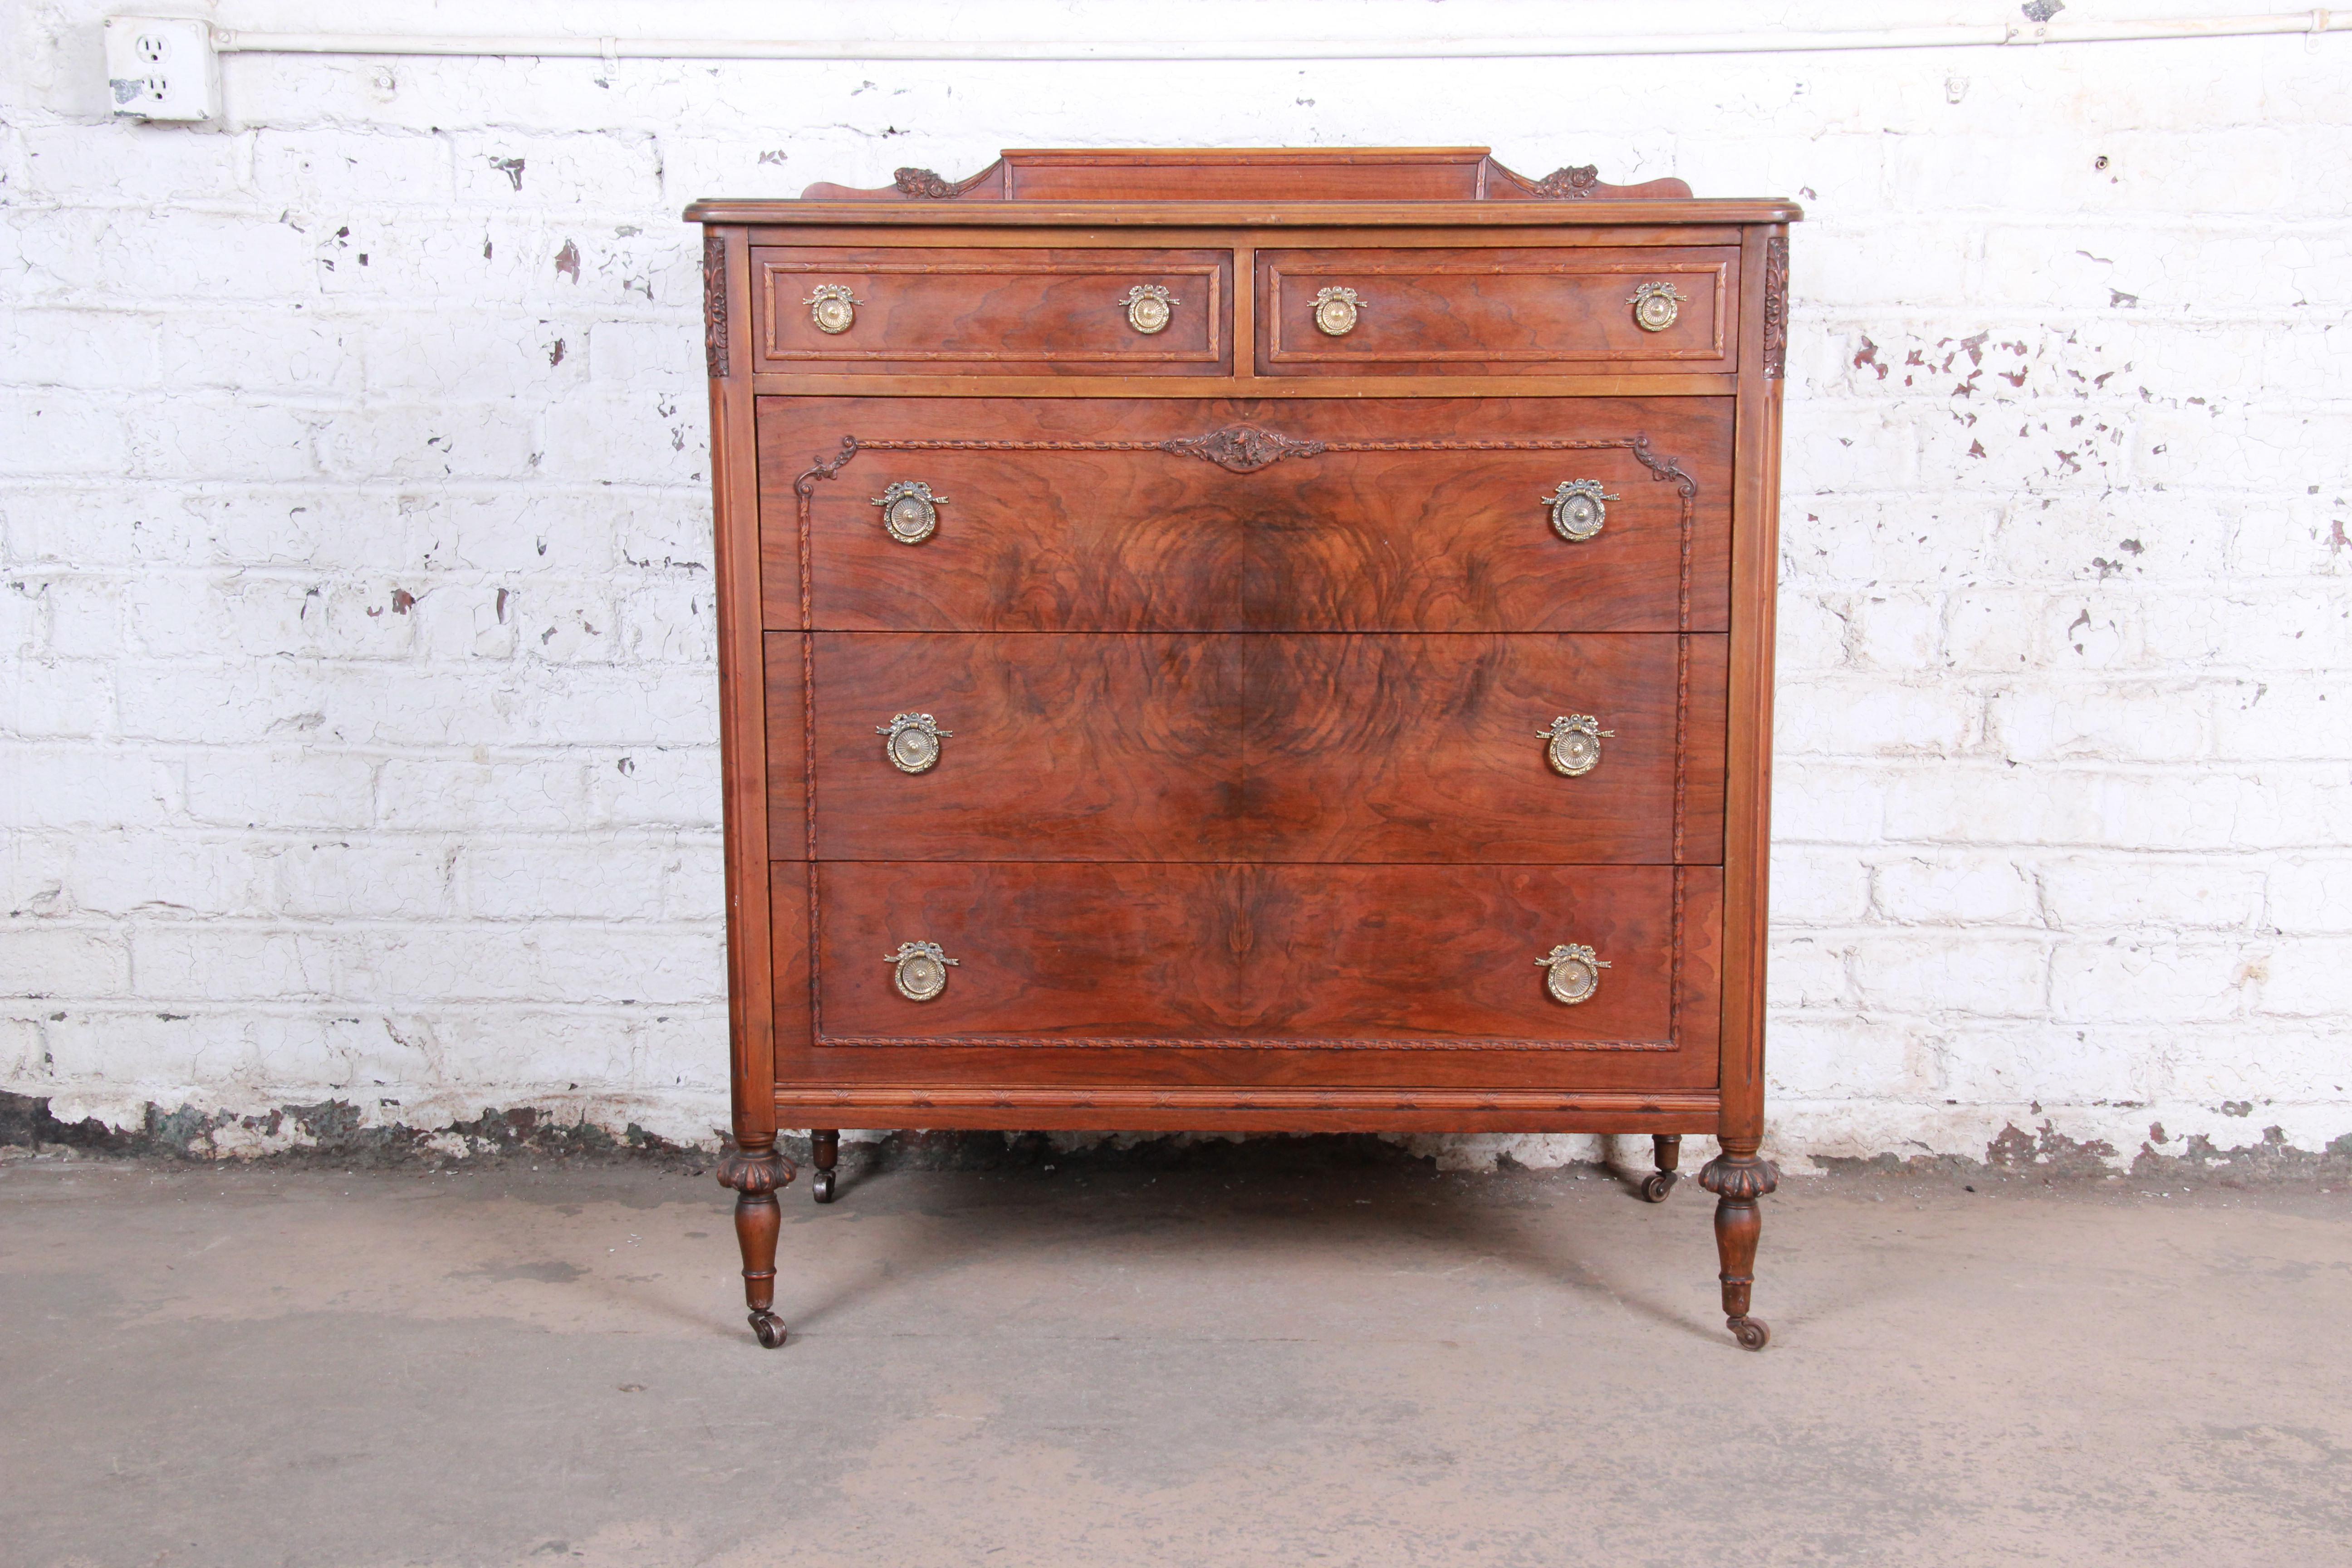 A gorgeous antique highboy chest of drawers by Widdicomb Furniture of Grand Rapids, circa 1920s. The dresser features stunning burled walnut wood grain and nice carved wood details. It offers ample storage, with five dovetailed drawers. The chest is